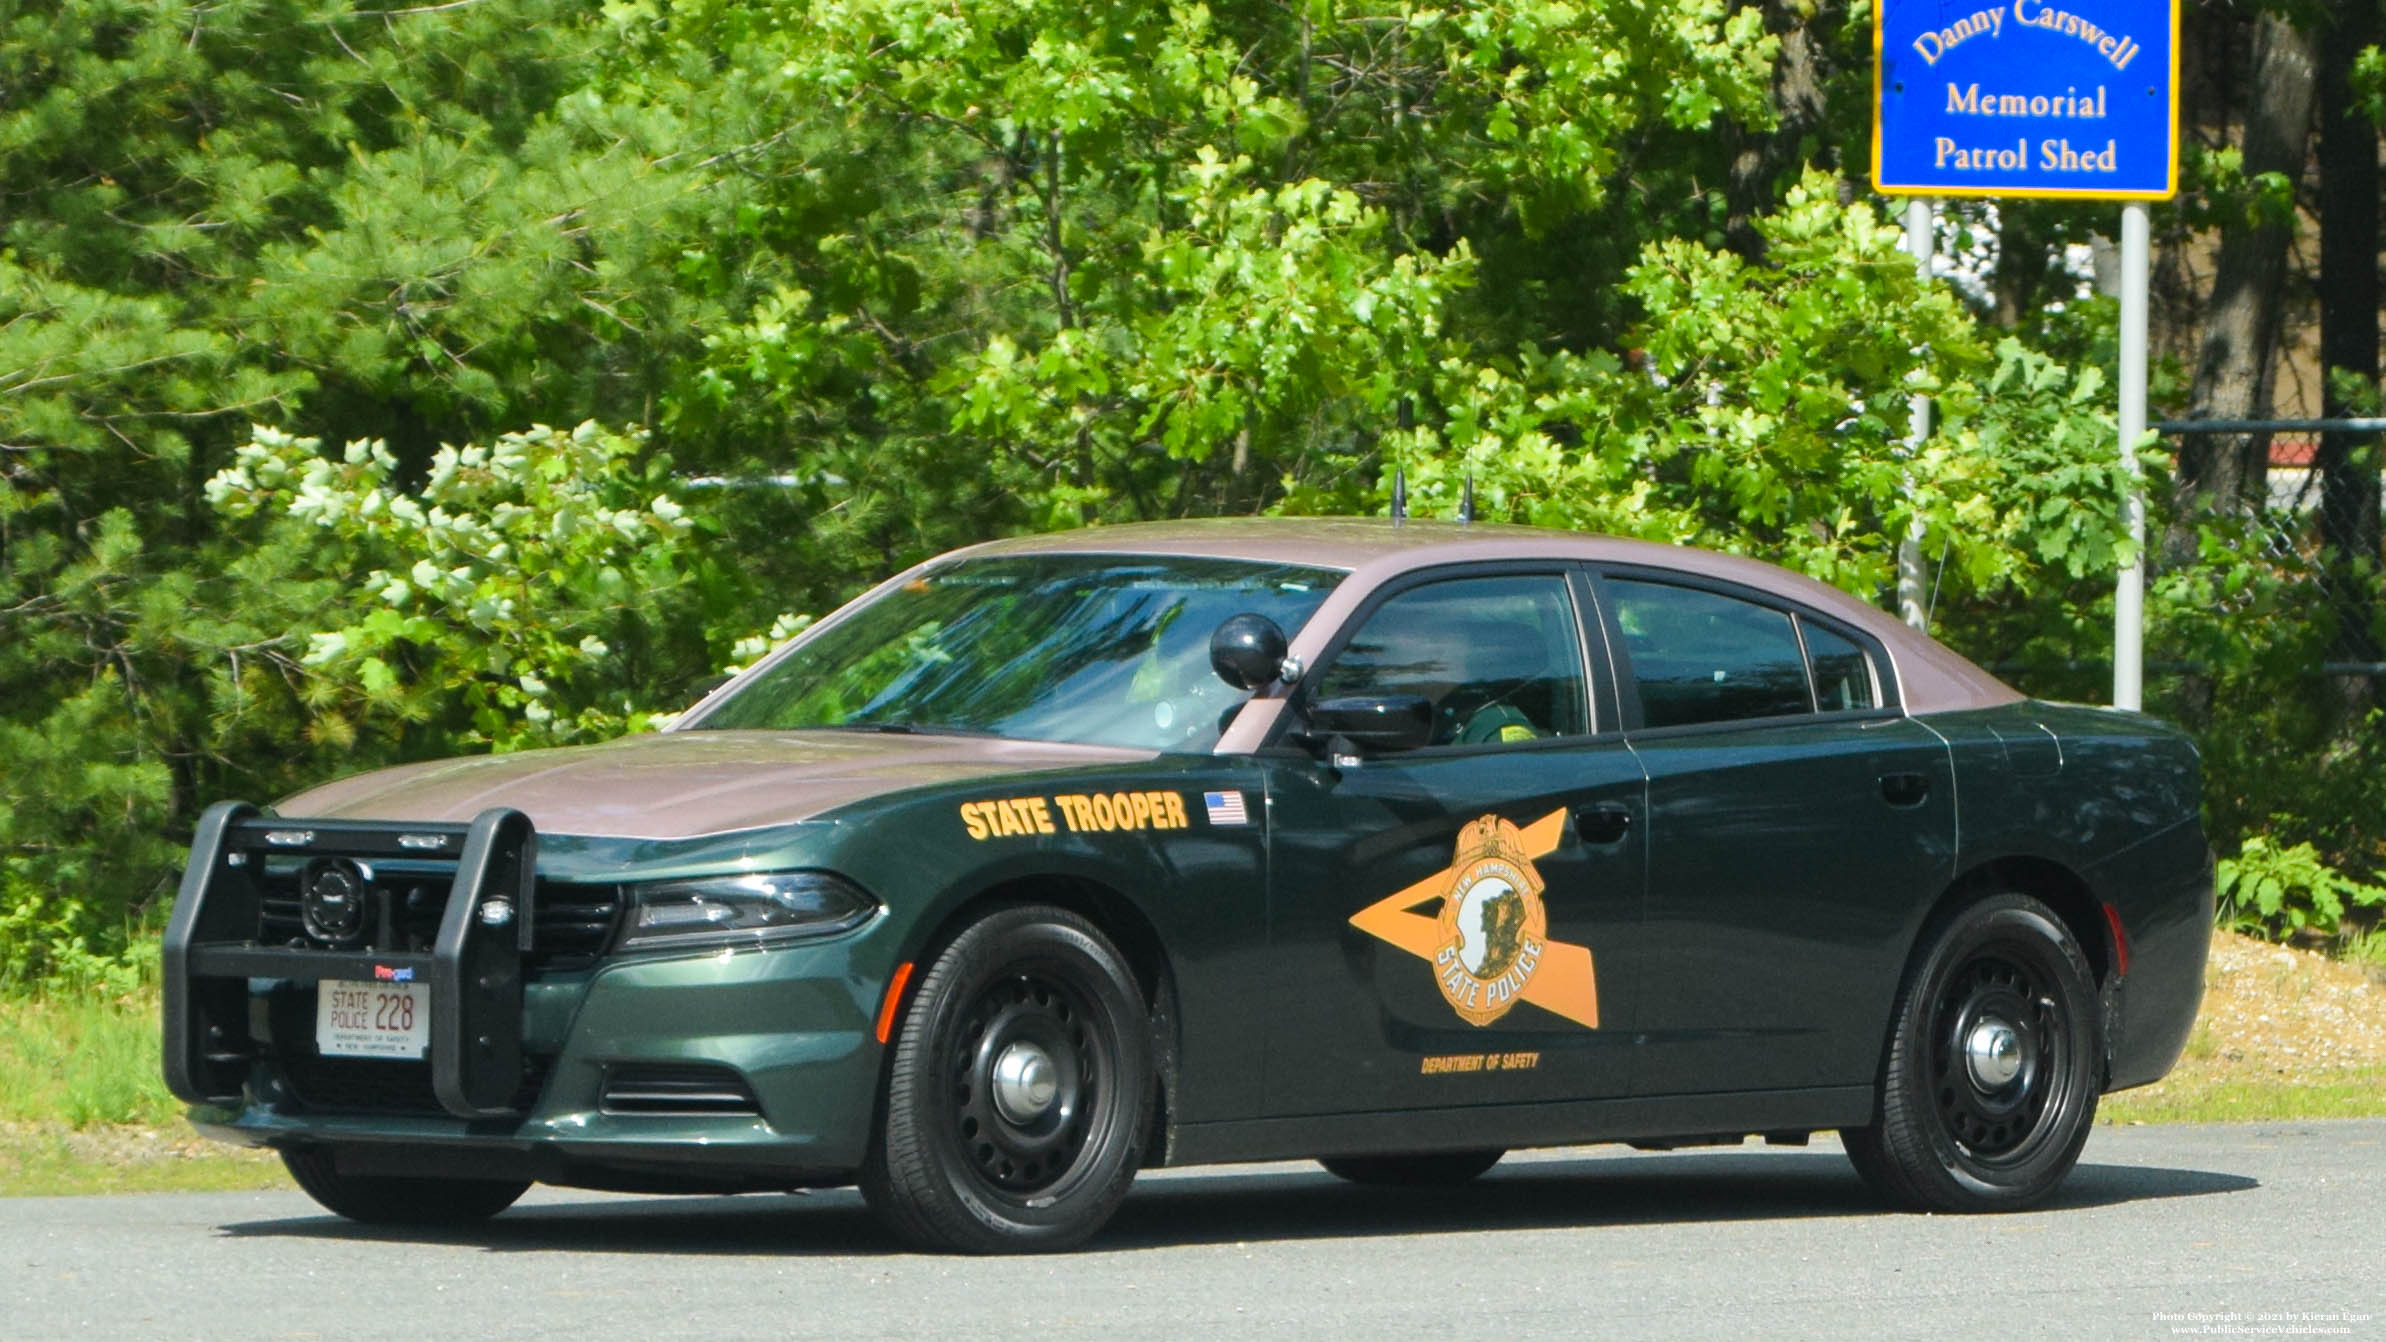 A photo  of New Hampshire State Police
            Cruiser 228, a 2020 Dodge Charger             taken by Kieran Egan